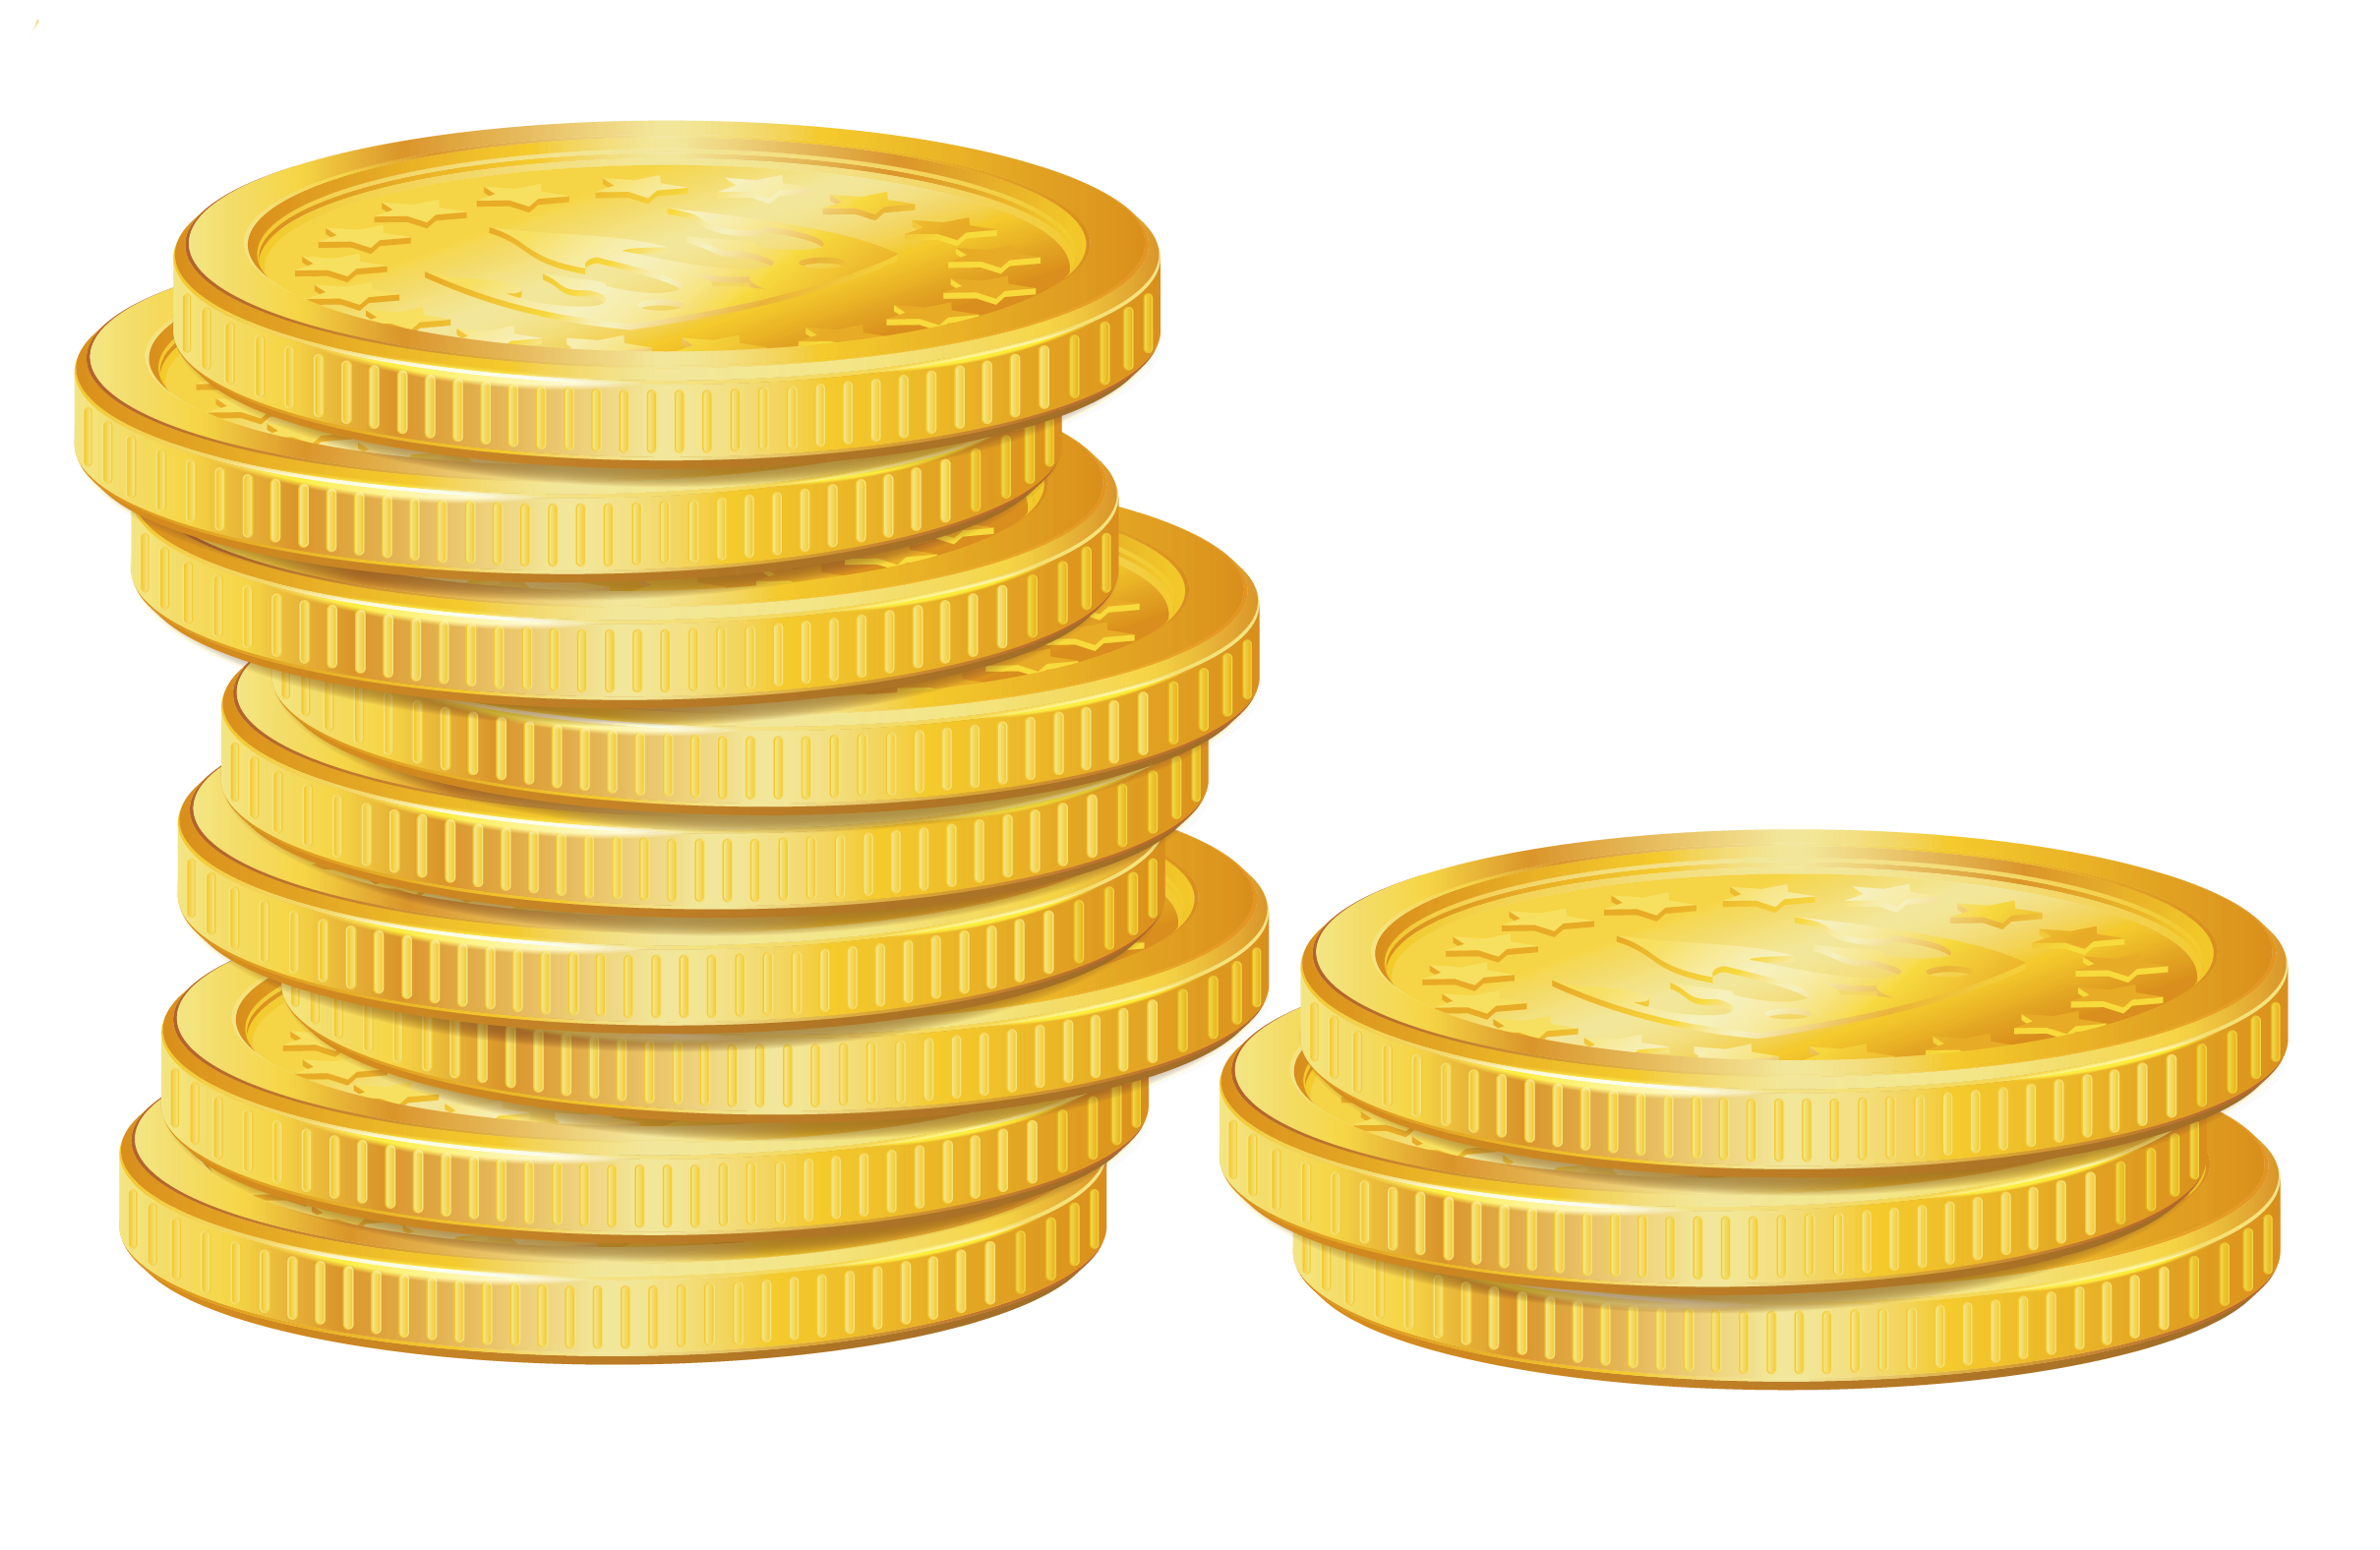 Free Coins Png Transparent Images, Download Free Coins Png T